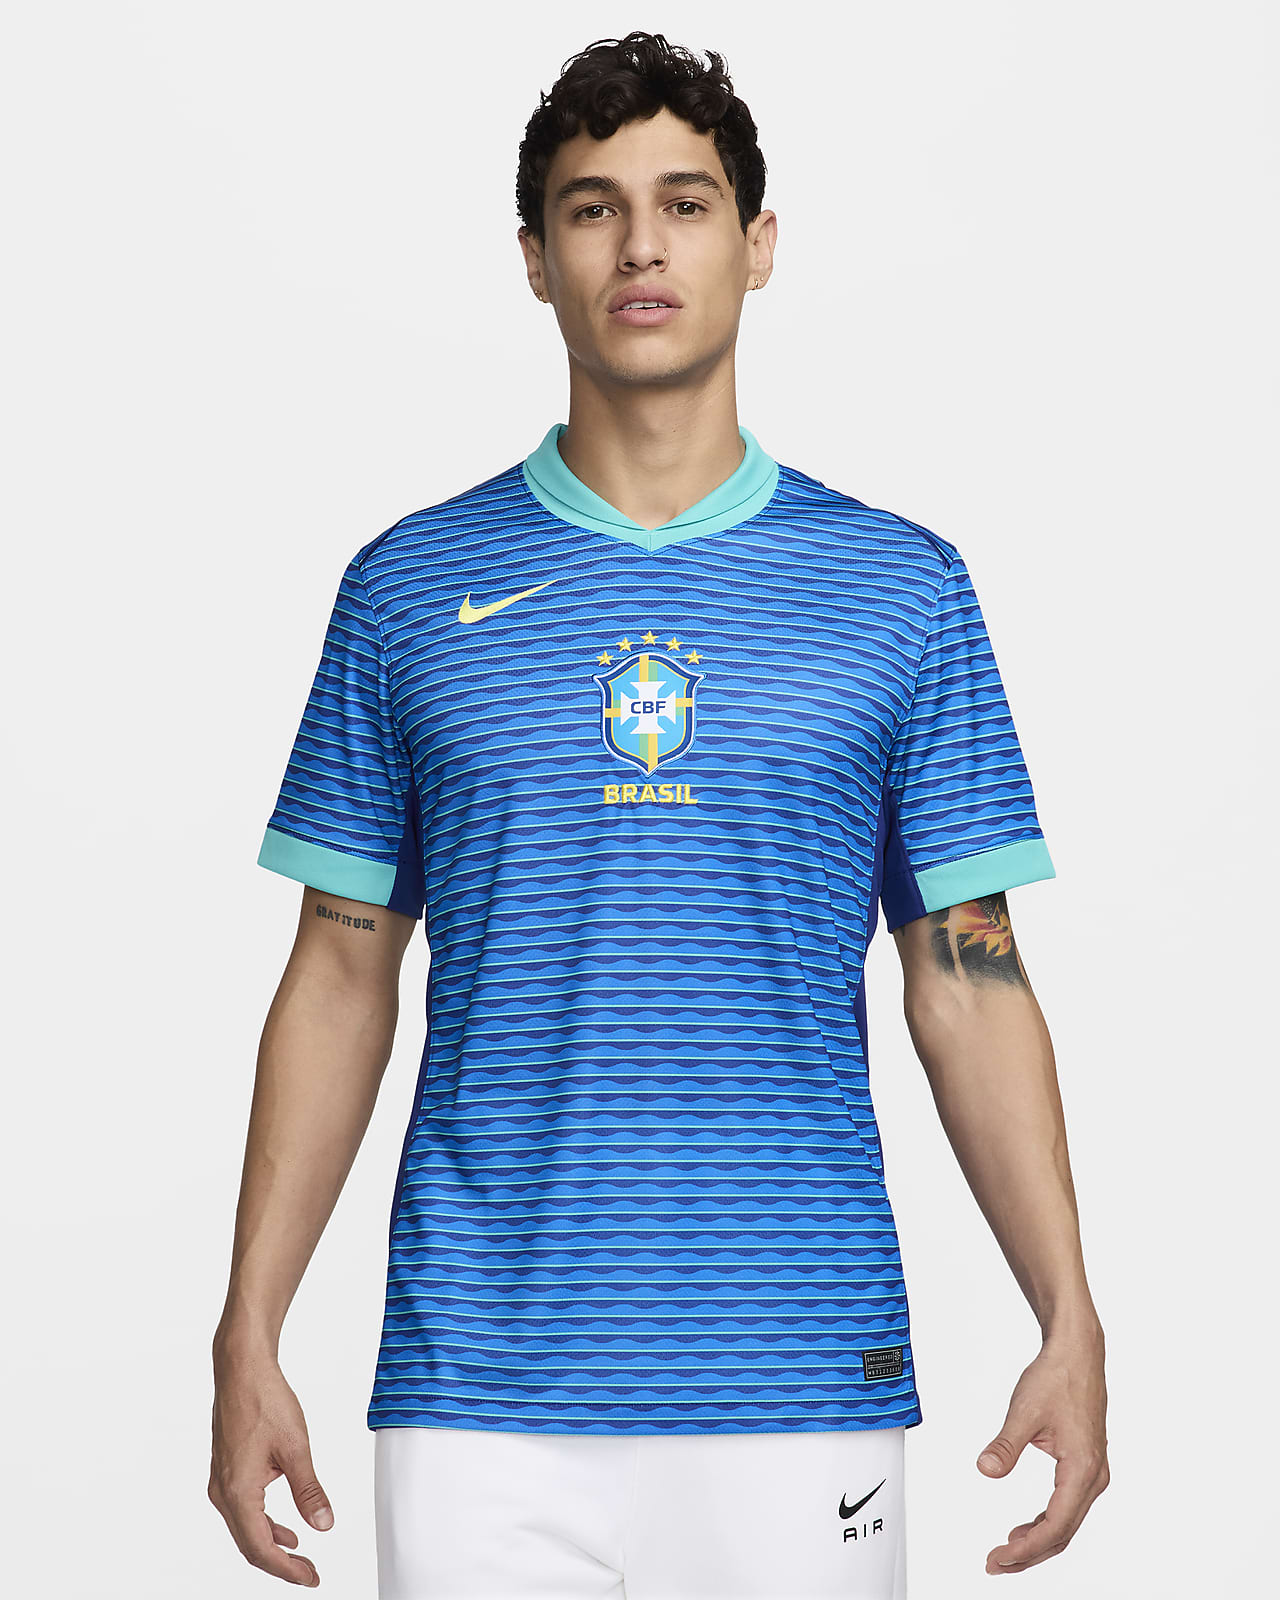 https://static.nike.com/a/images/t_PDP_1280_v1/f_auto,q_auto:eco/565109a7-6d83-4c4e-95a5-204986ed0b2e/brazil-2024-stadium-away-dri-fit-football-replica-shirt-Lxzpkh.png